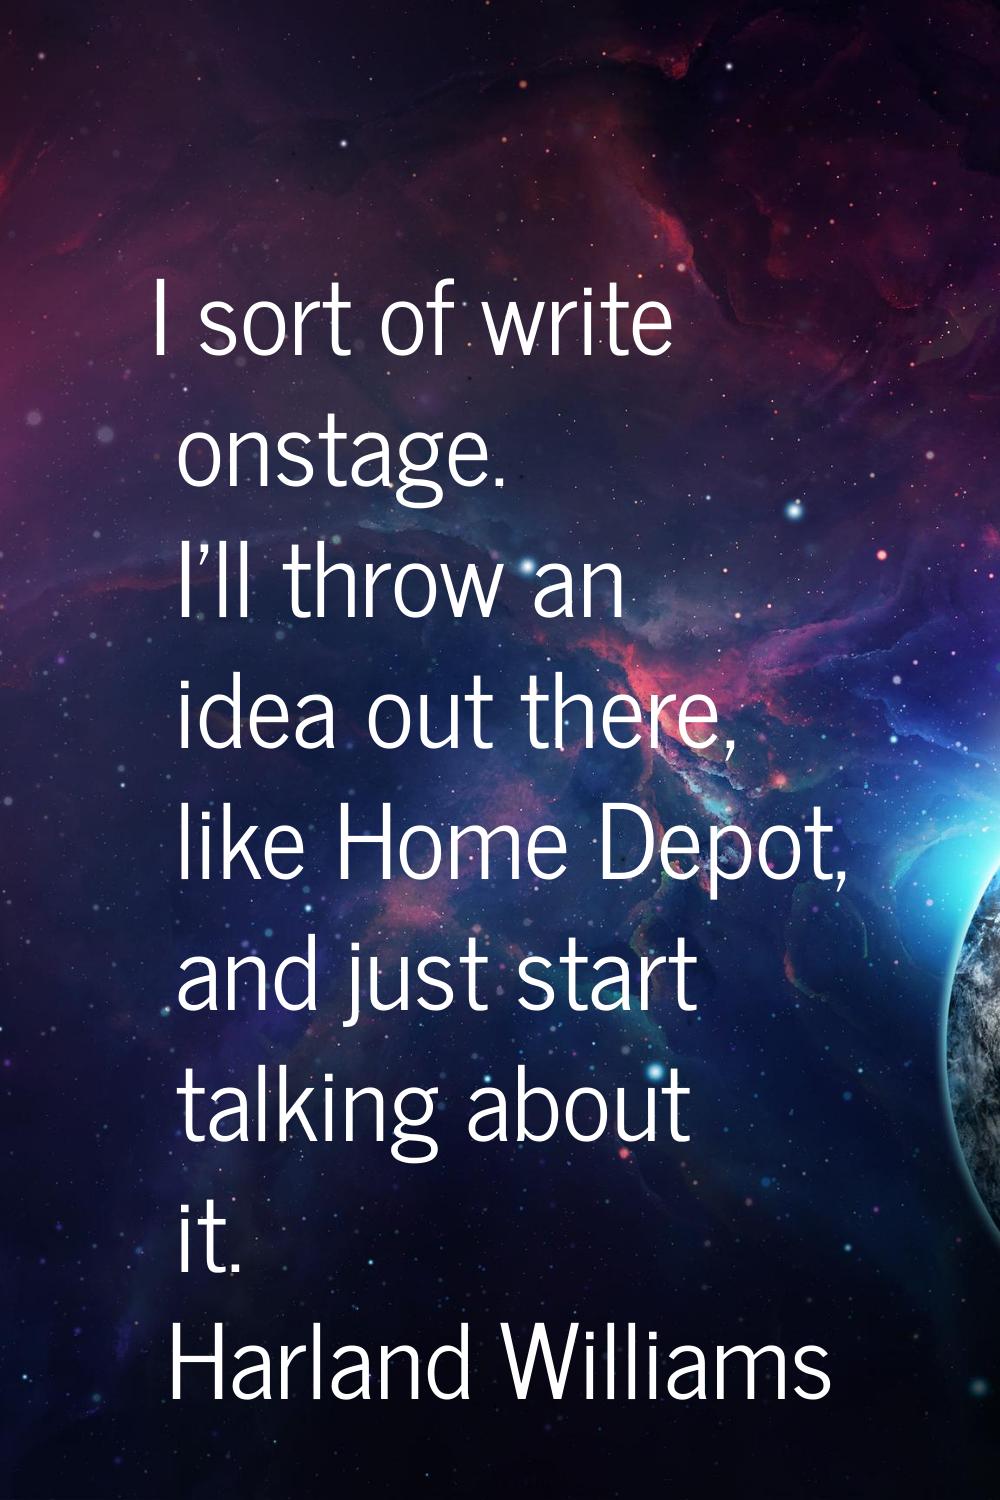 I sort of write onstage. I'll throw an idea out there, like Home Depot, and just start talking abou